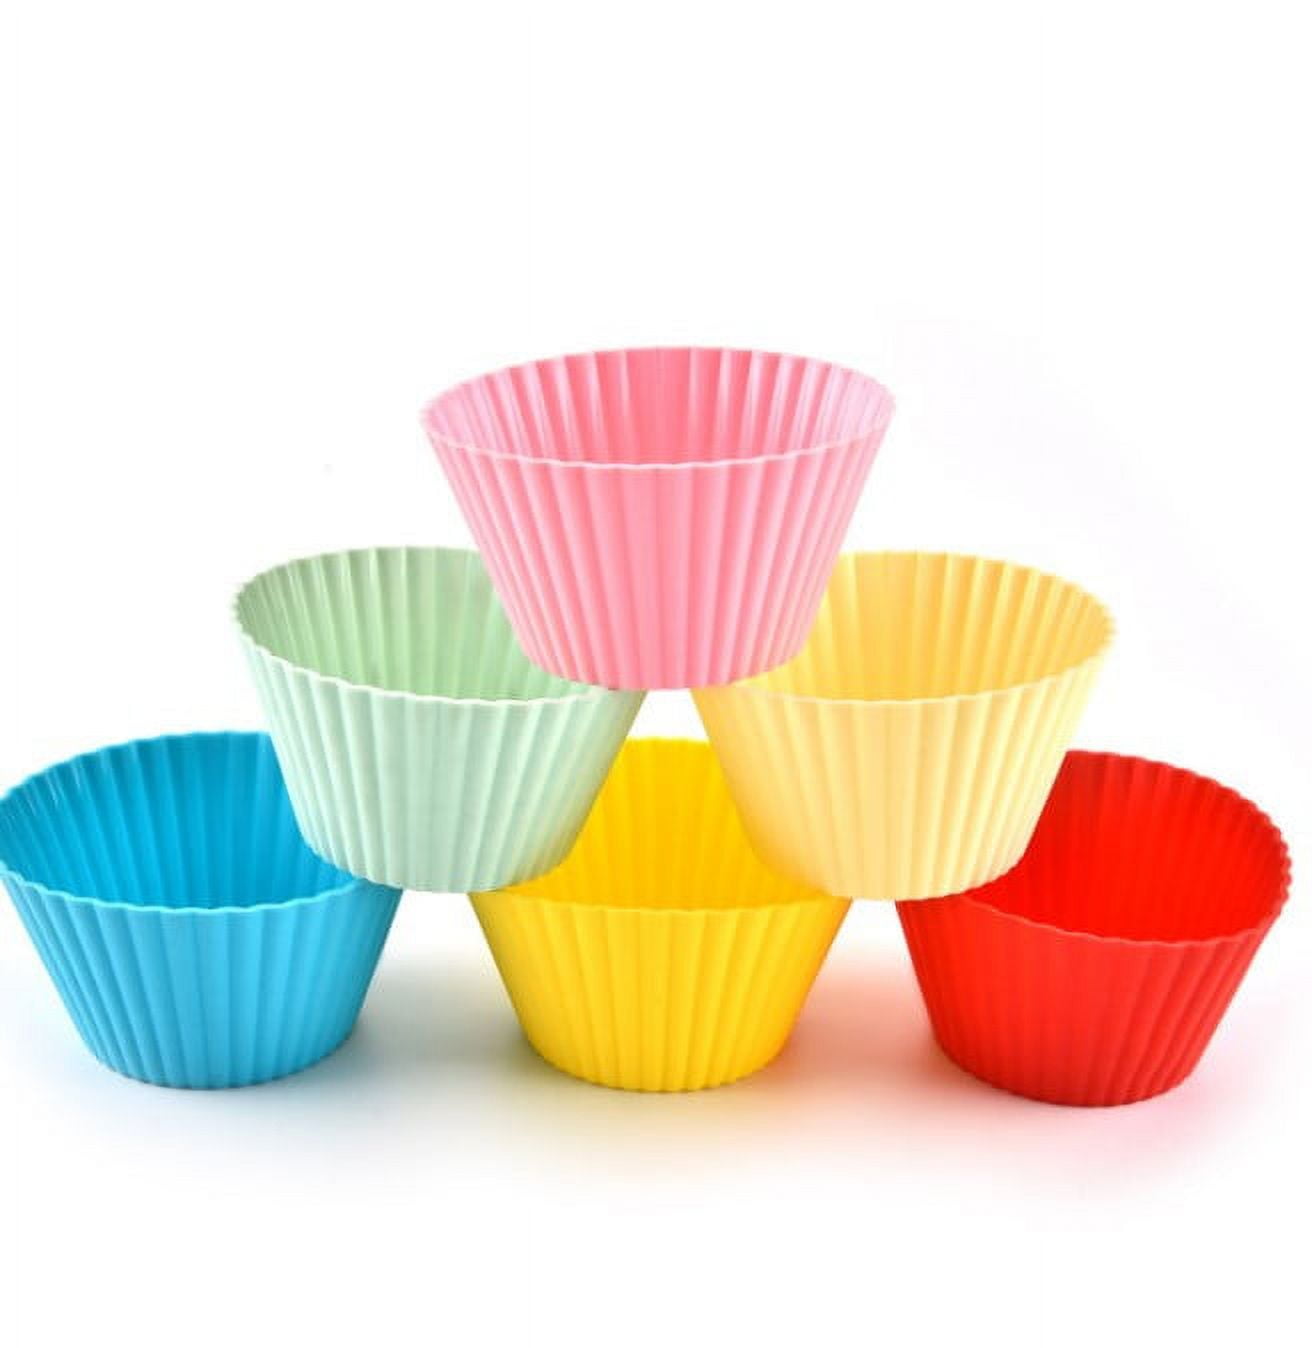 9.2cm Jumbo Silicone Muffin Cupcake Cases, Giant Reusable Cake Moulds, Large  Nonstick Baking Cups for Yorkshire Pudding Tray, Deep Cupcake Tin, Bun Pan,  Air Fryer Liners Bakeware,12 Pack 